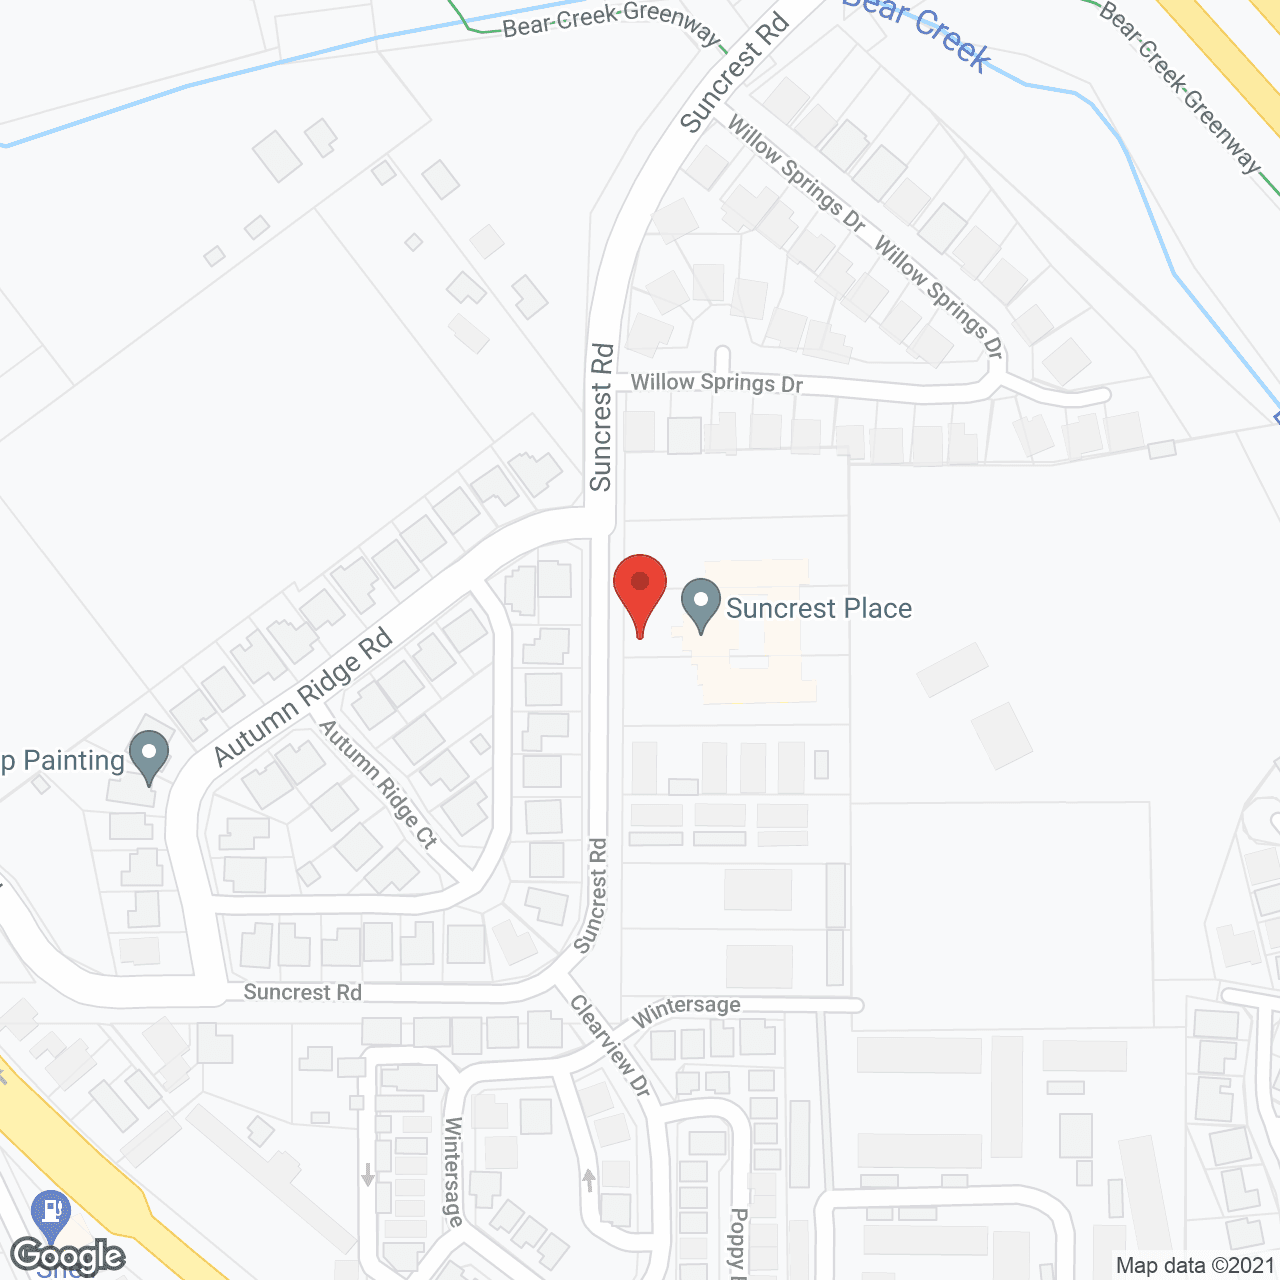 Trustwell Living at Suncrest Place in google map